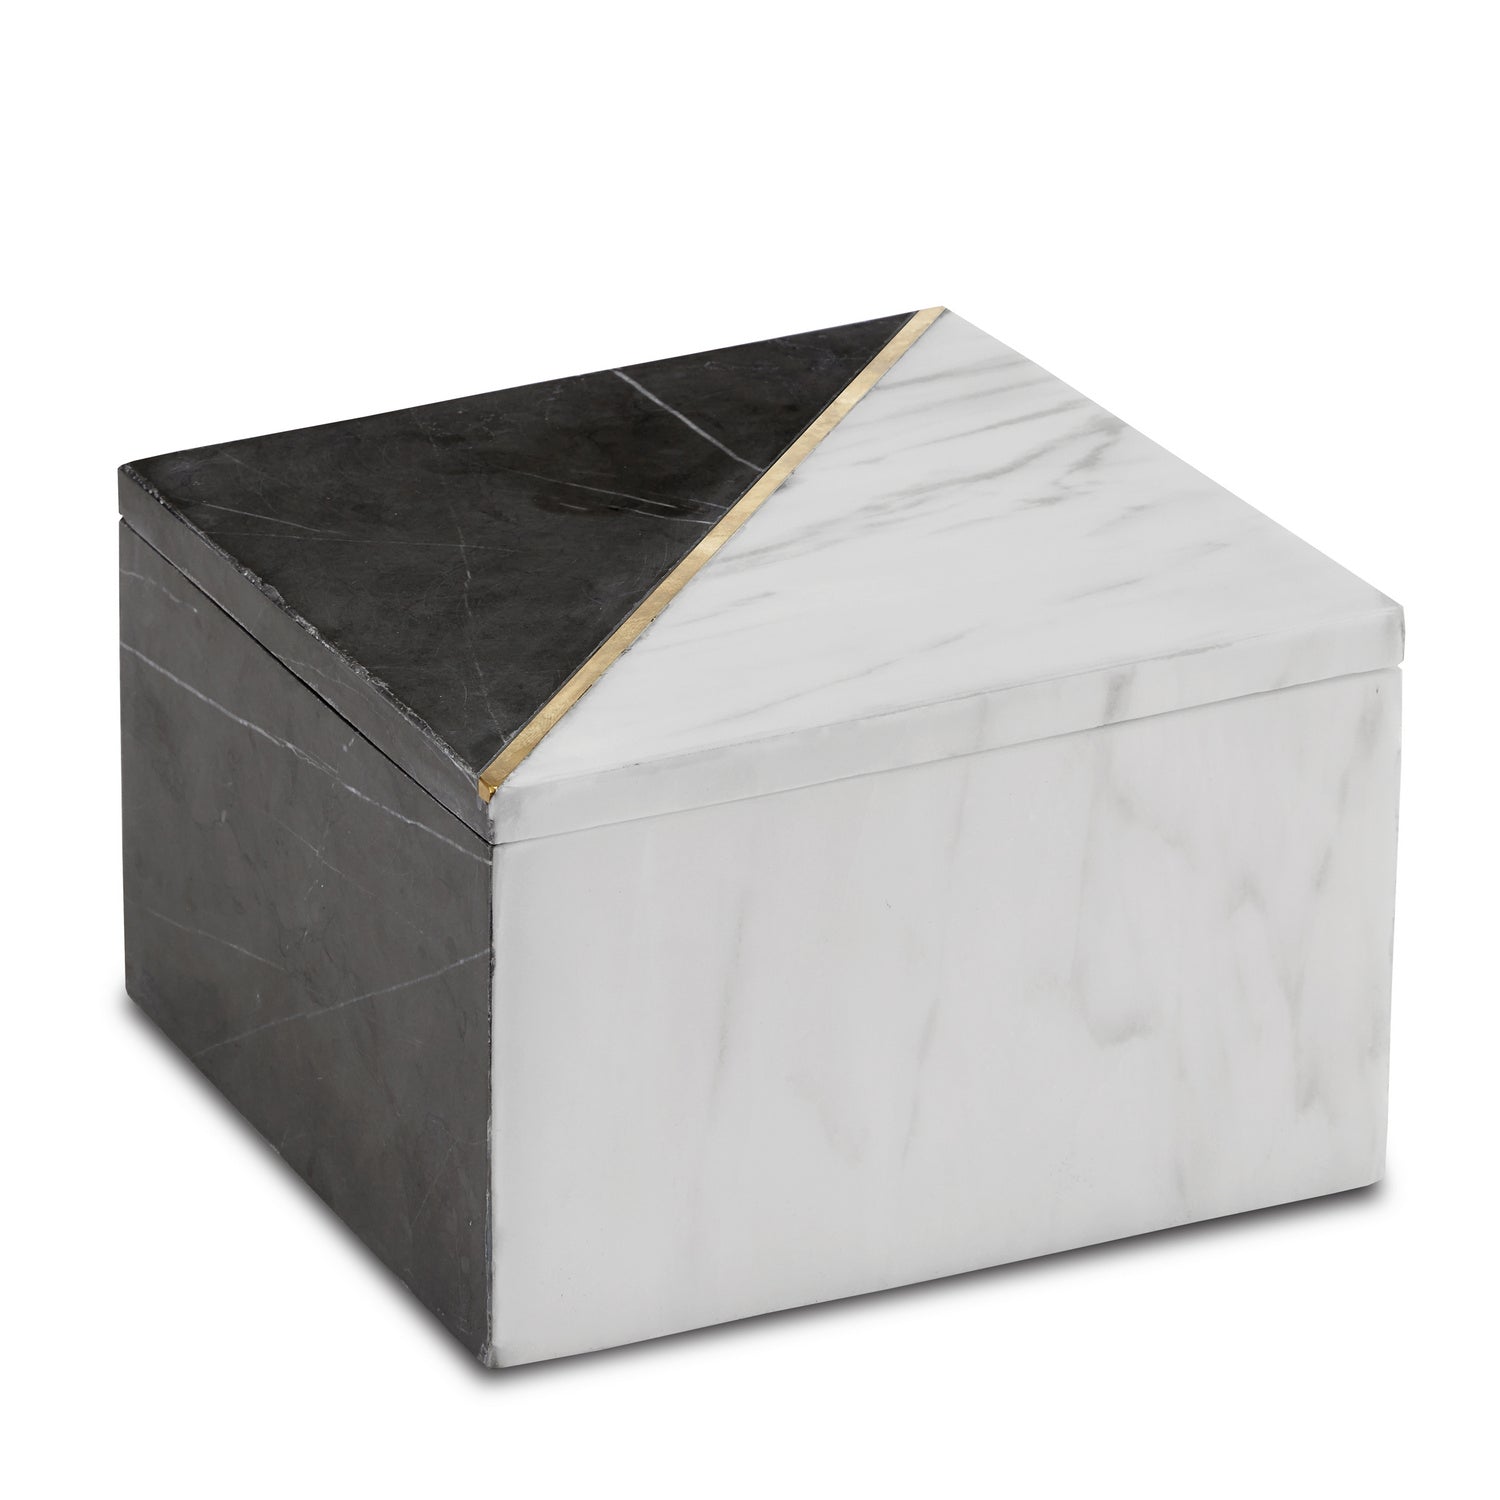 Box from the Deena collection in White/Black/Brass finish